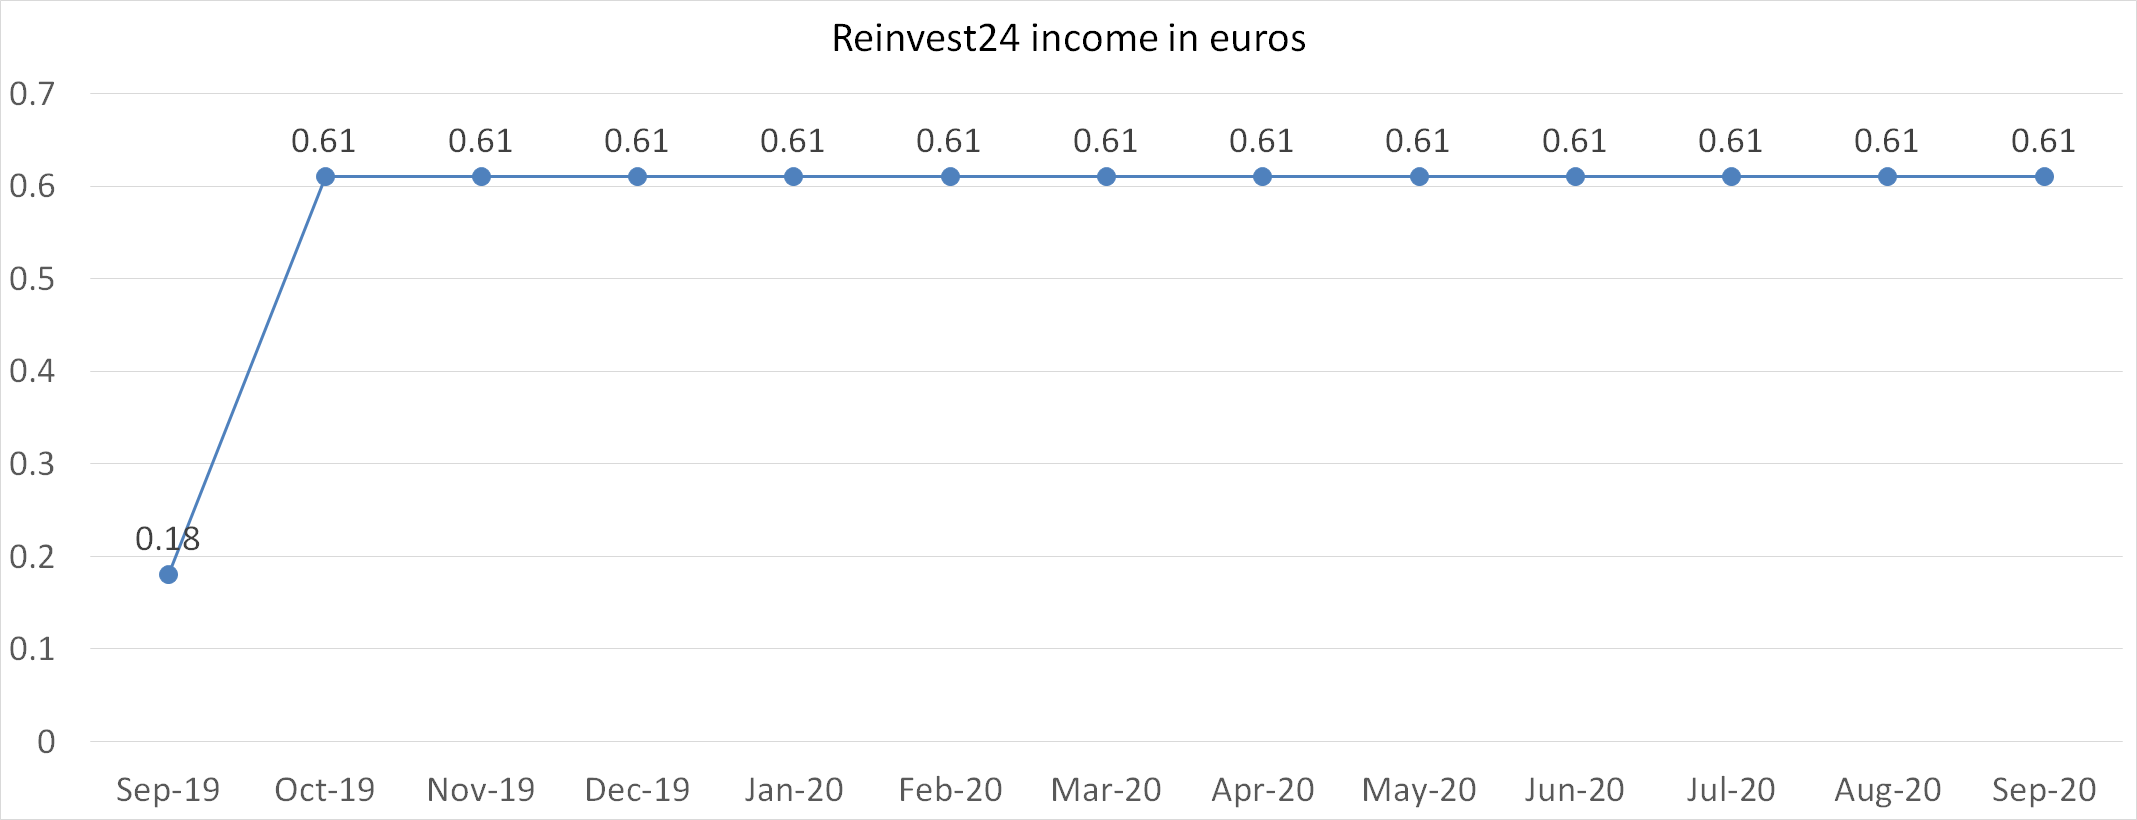 Reinvest24 income in euros september 2020